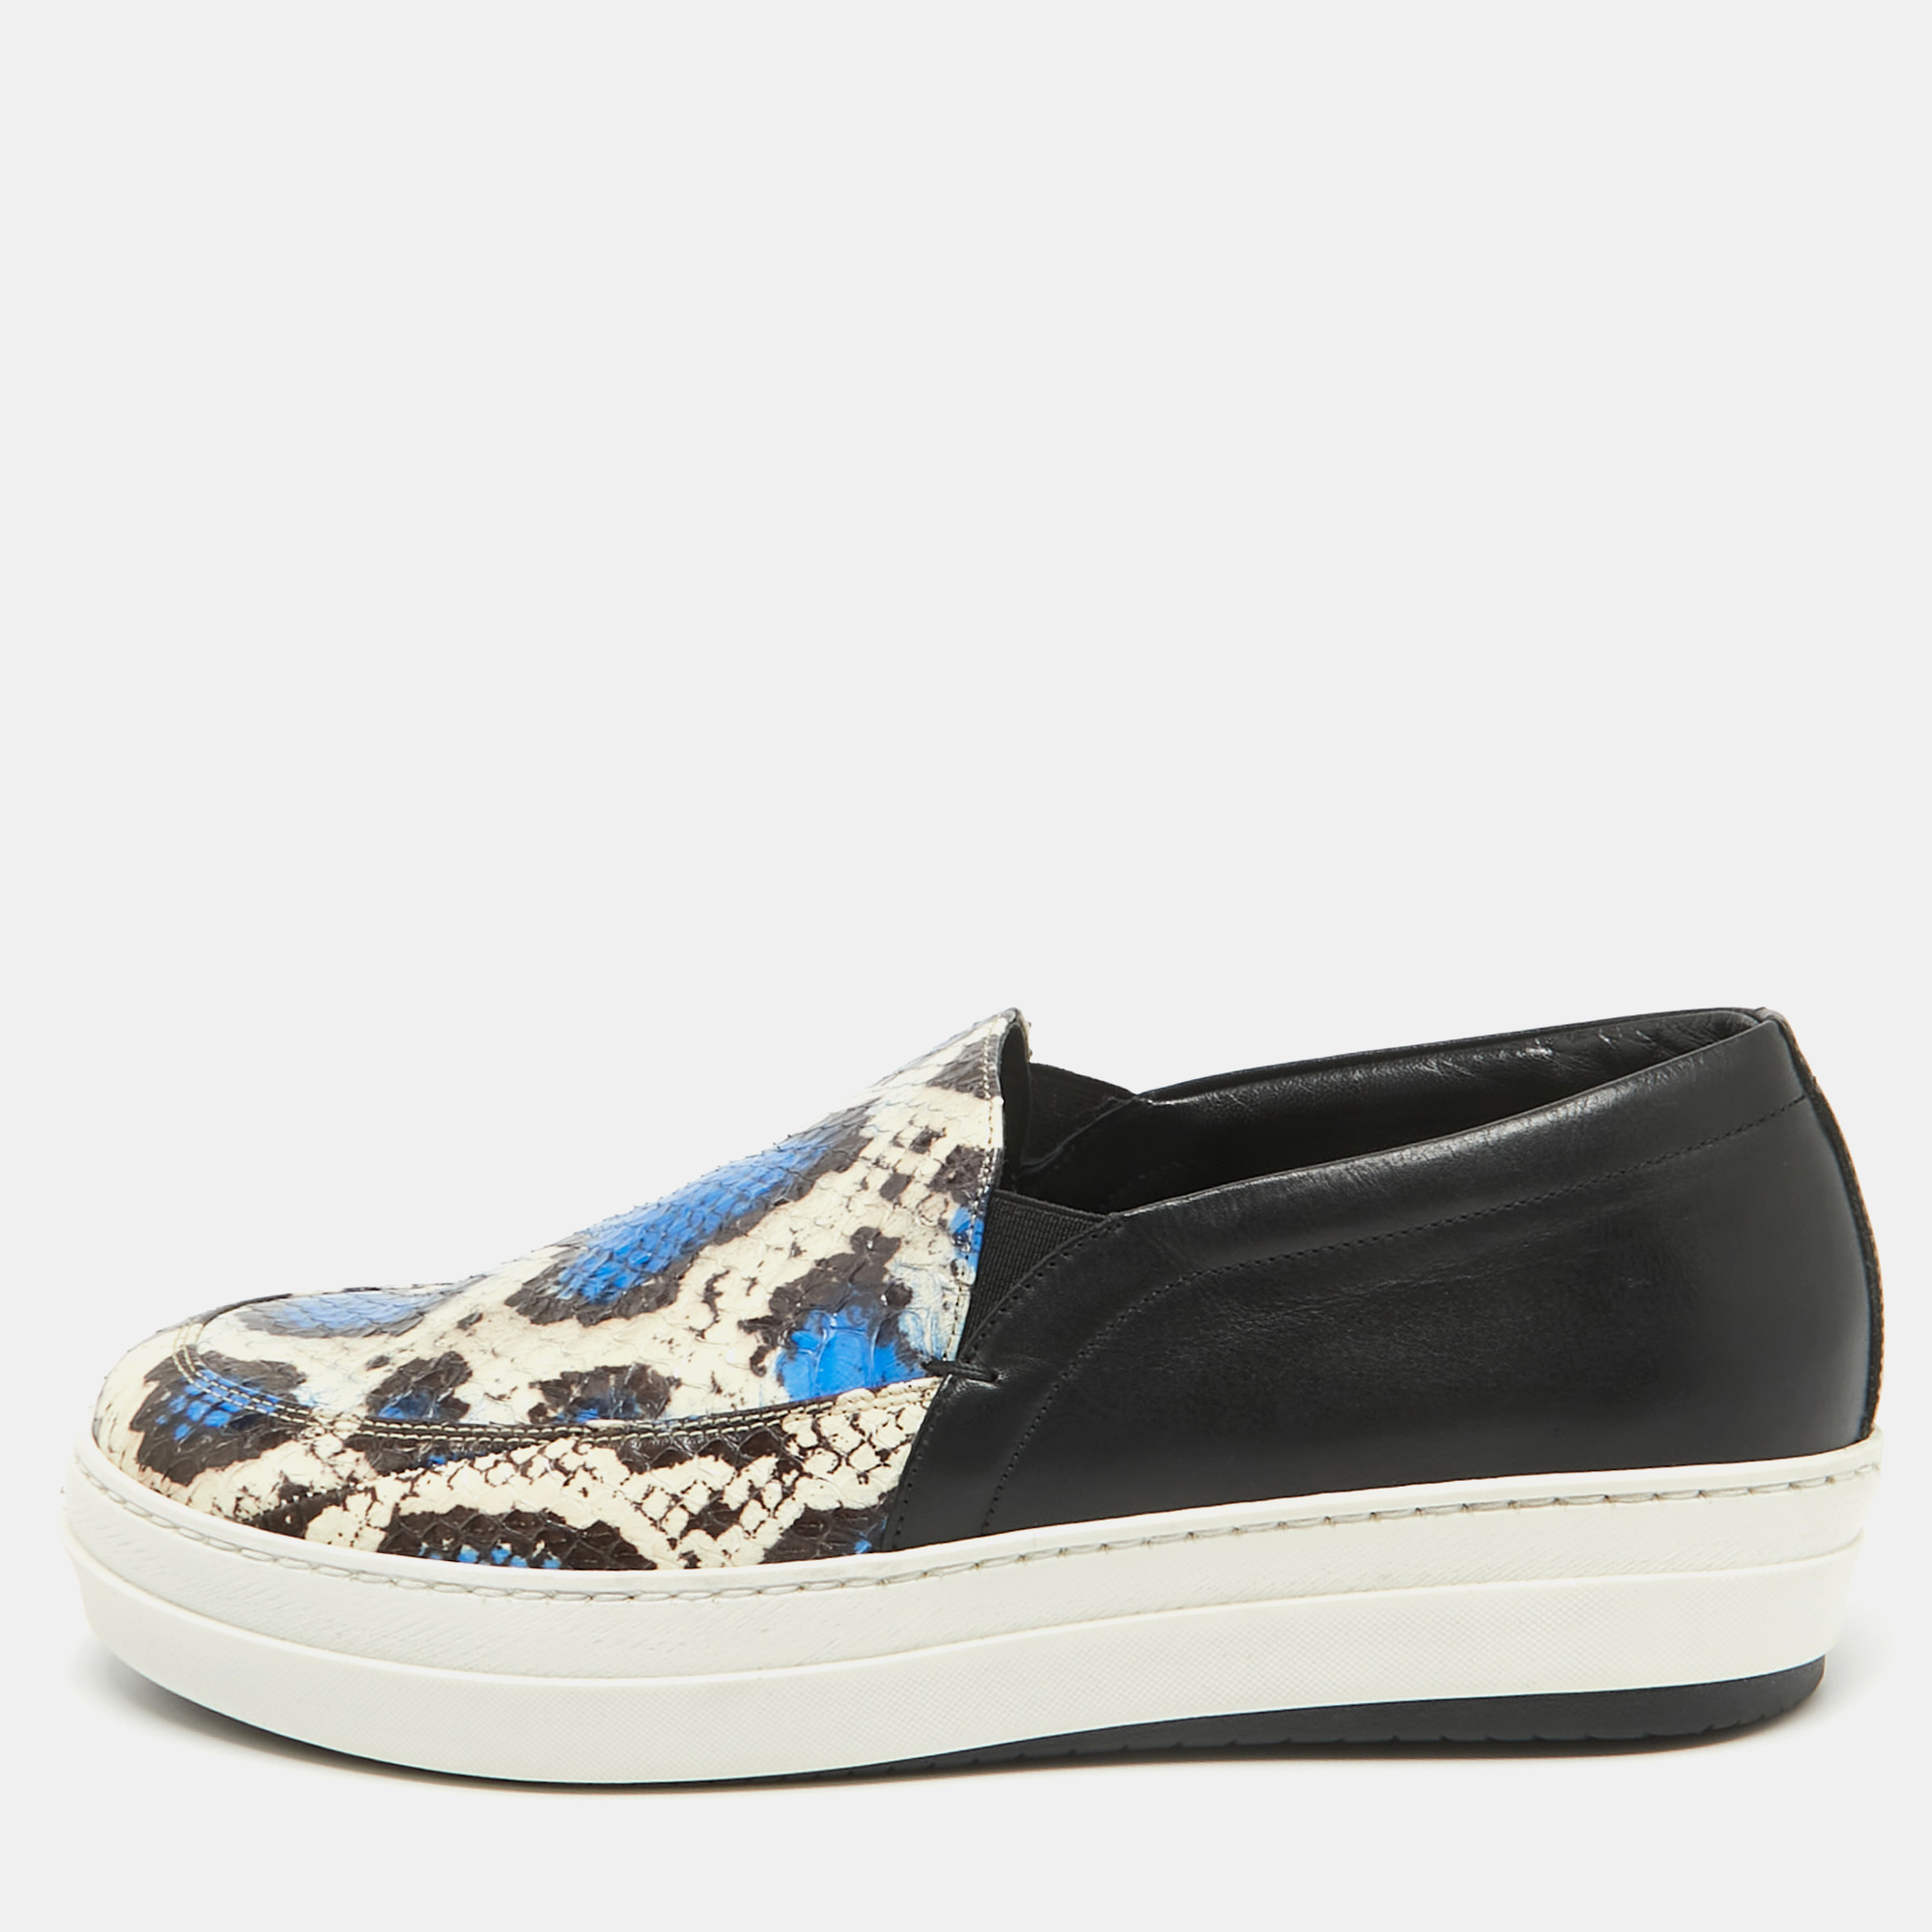 Mcq by alexander mcqueen tricolor python leather slip on sneakers size 41